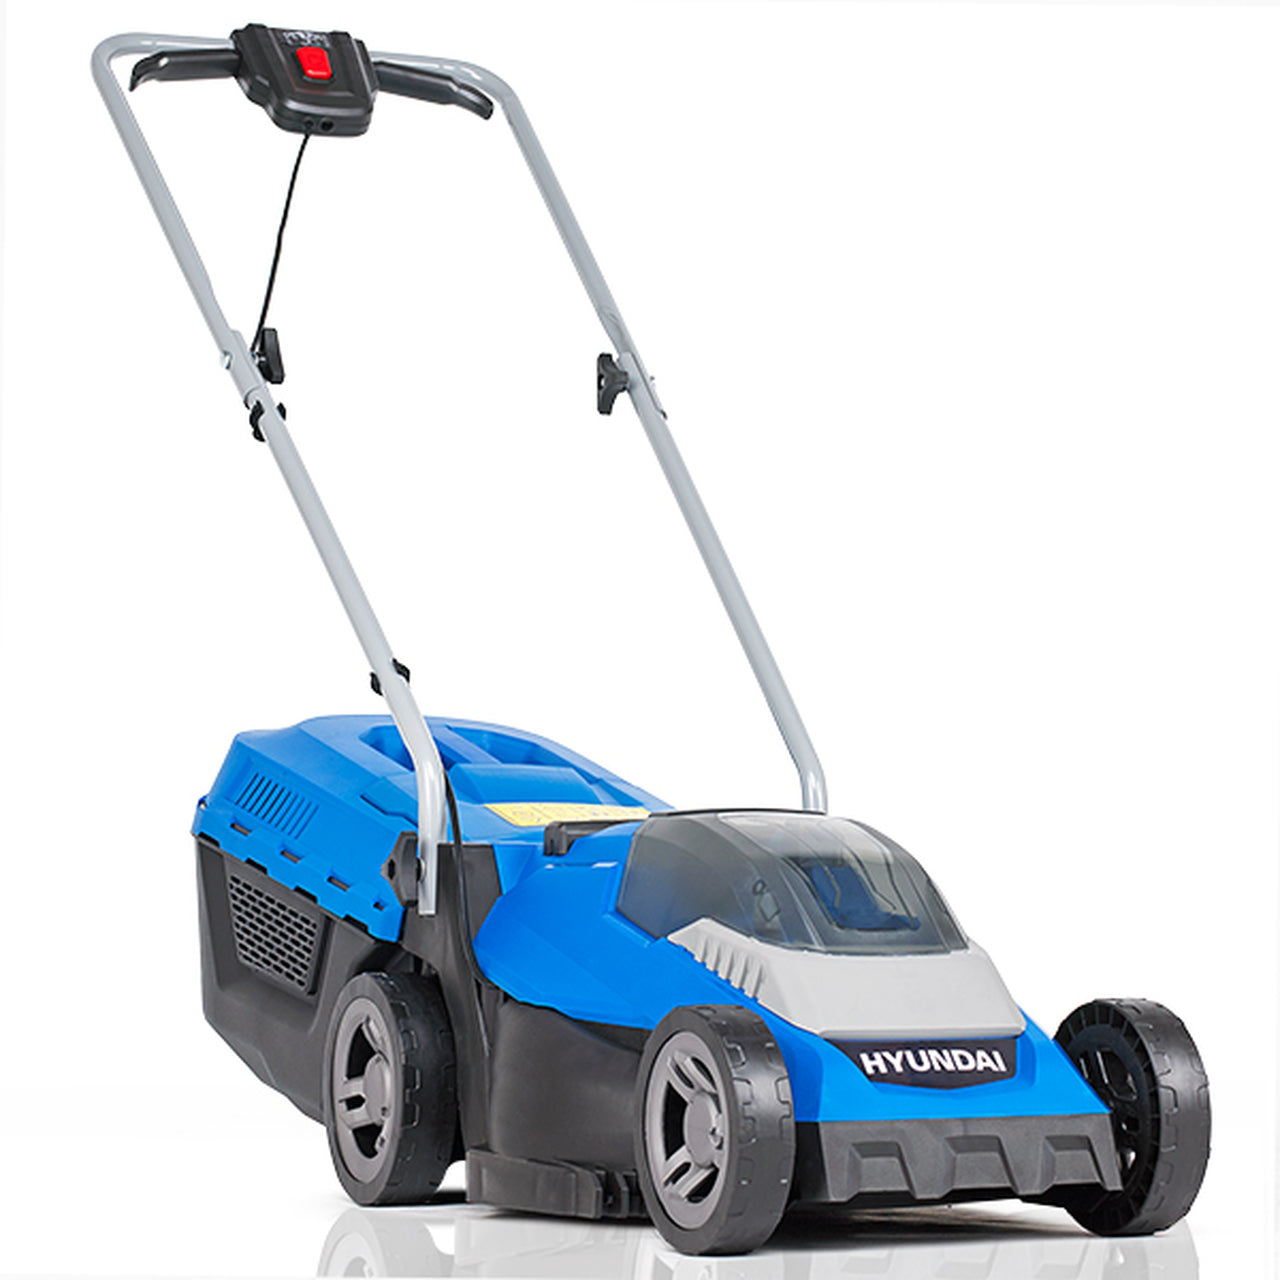 Hyundai-HYM40LI330P-40V-Lithium-Ion-Cordless-Roller-Lawn-Mower-With-Battery-&-Charger